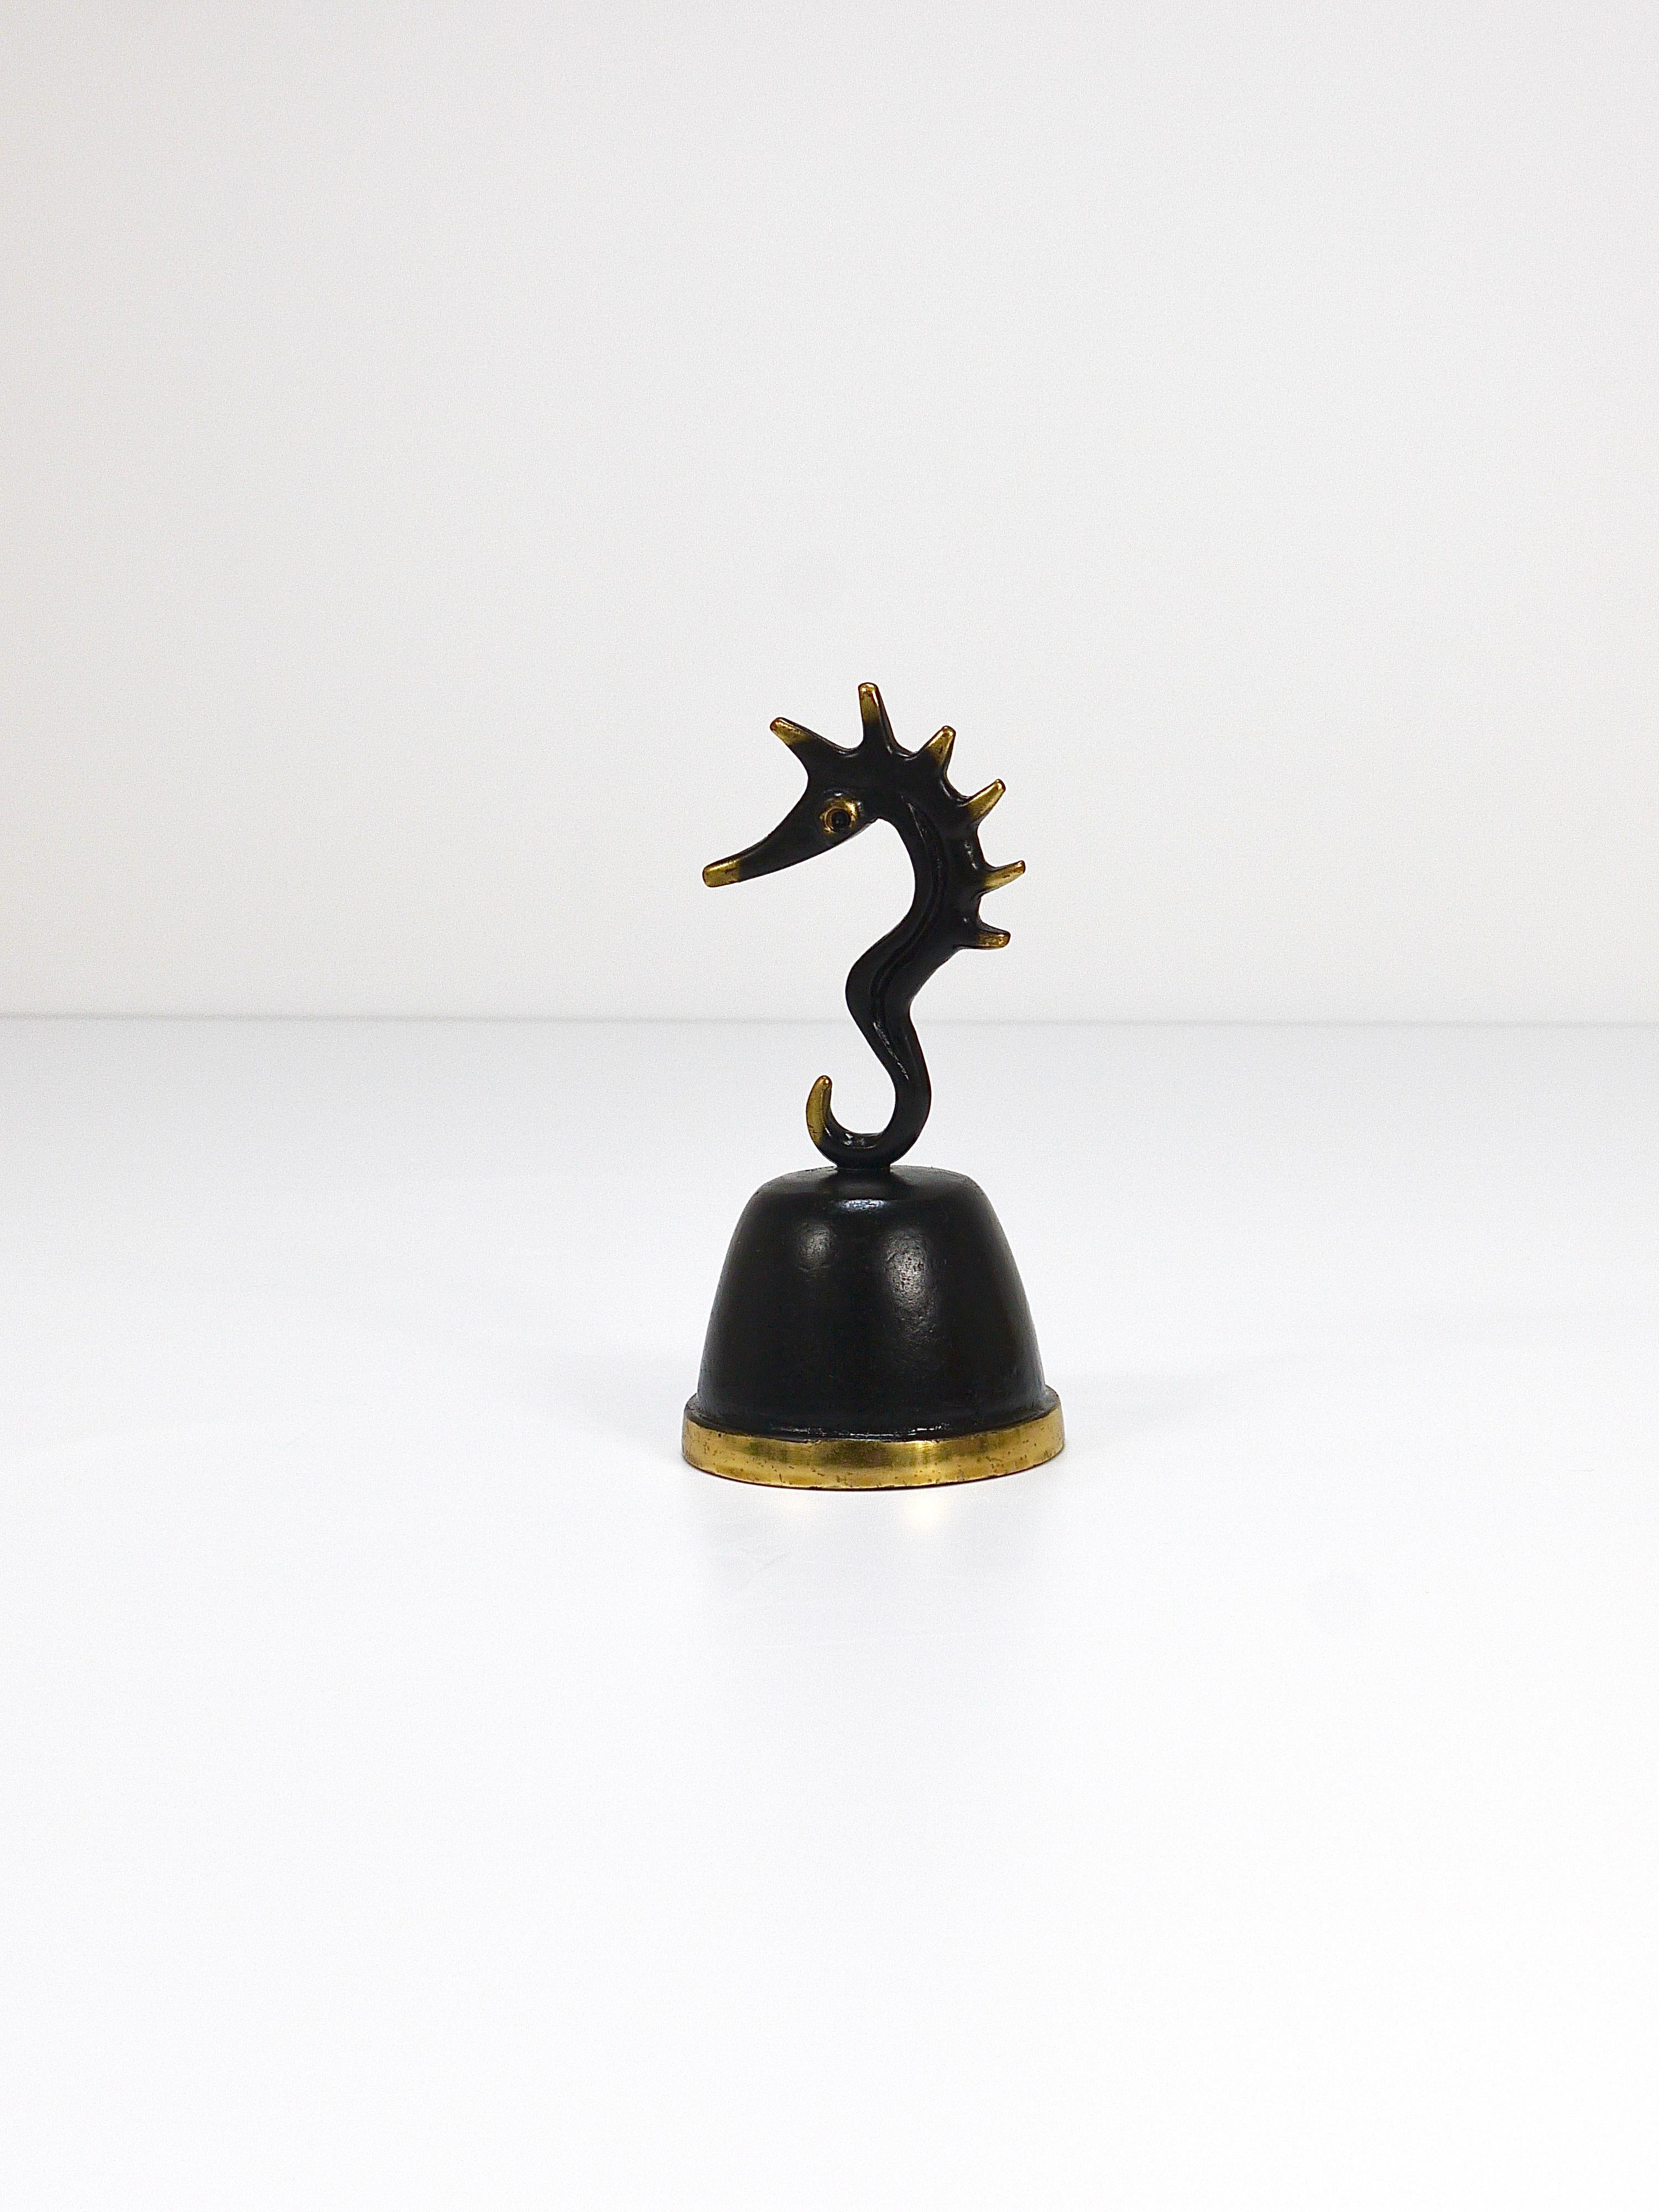 A charming sculptural table dining bell, displaying a cute seahorse. A humorous design by Walter Bosse, executed by Hertha Baller Vienna, Austria in the 1950s. Made of brass, in very good condition with marginal patina. The bell has a wonderful